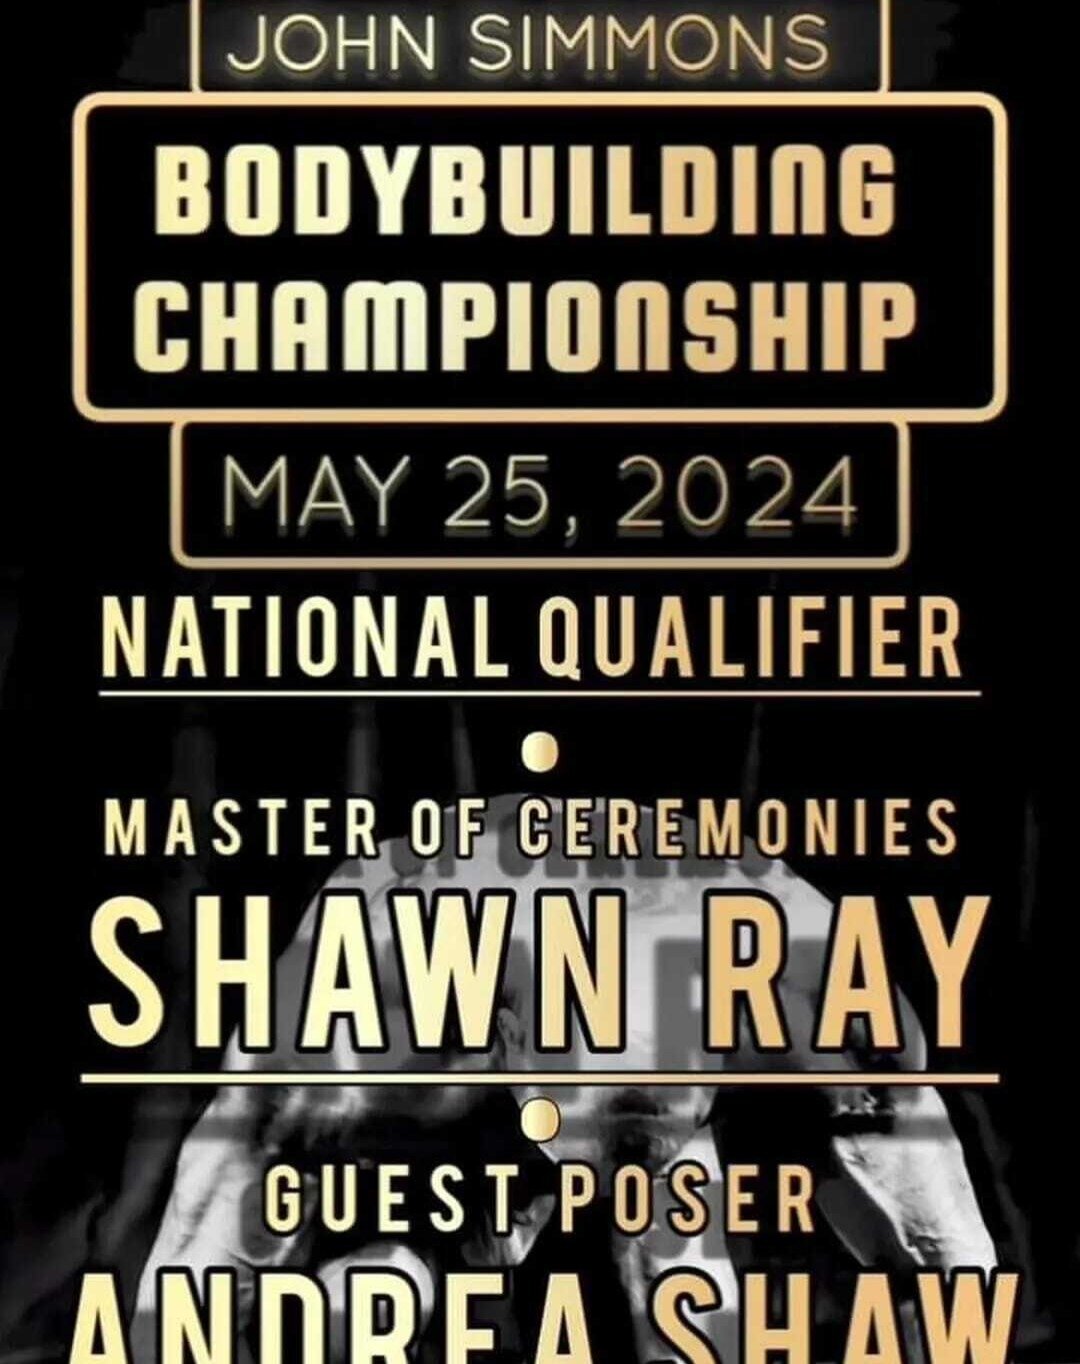 Early Registration is open for the 2024 John Simmons Championships taking place May 25th. Guaranteed to be a great event with guest poser, 4x Ms. Olympia Andrea Shaw and 13x Mr. Olympia finalist, Shawn Ray as emcee. for more information, head to www.